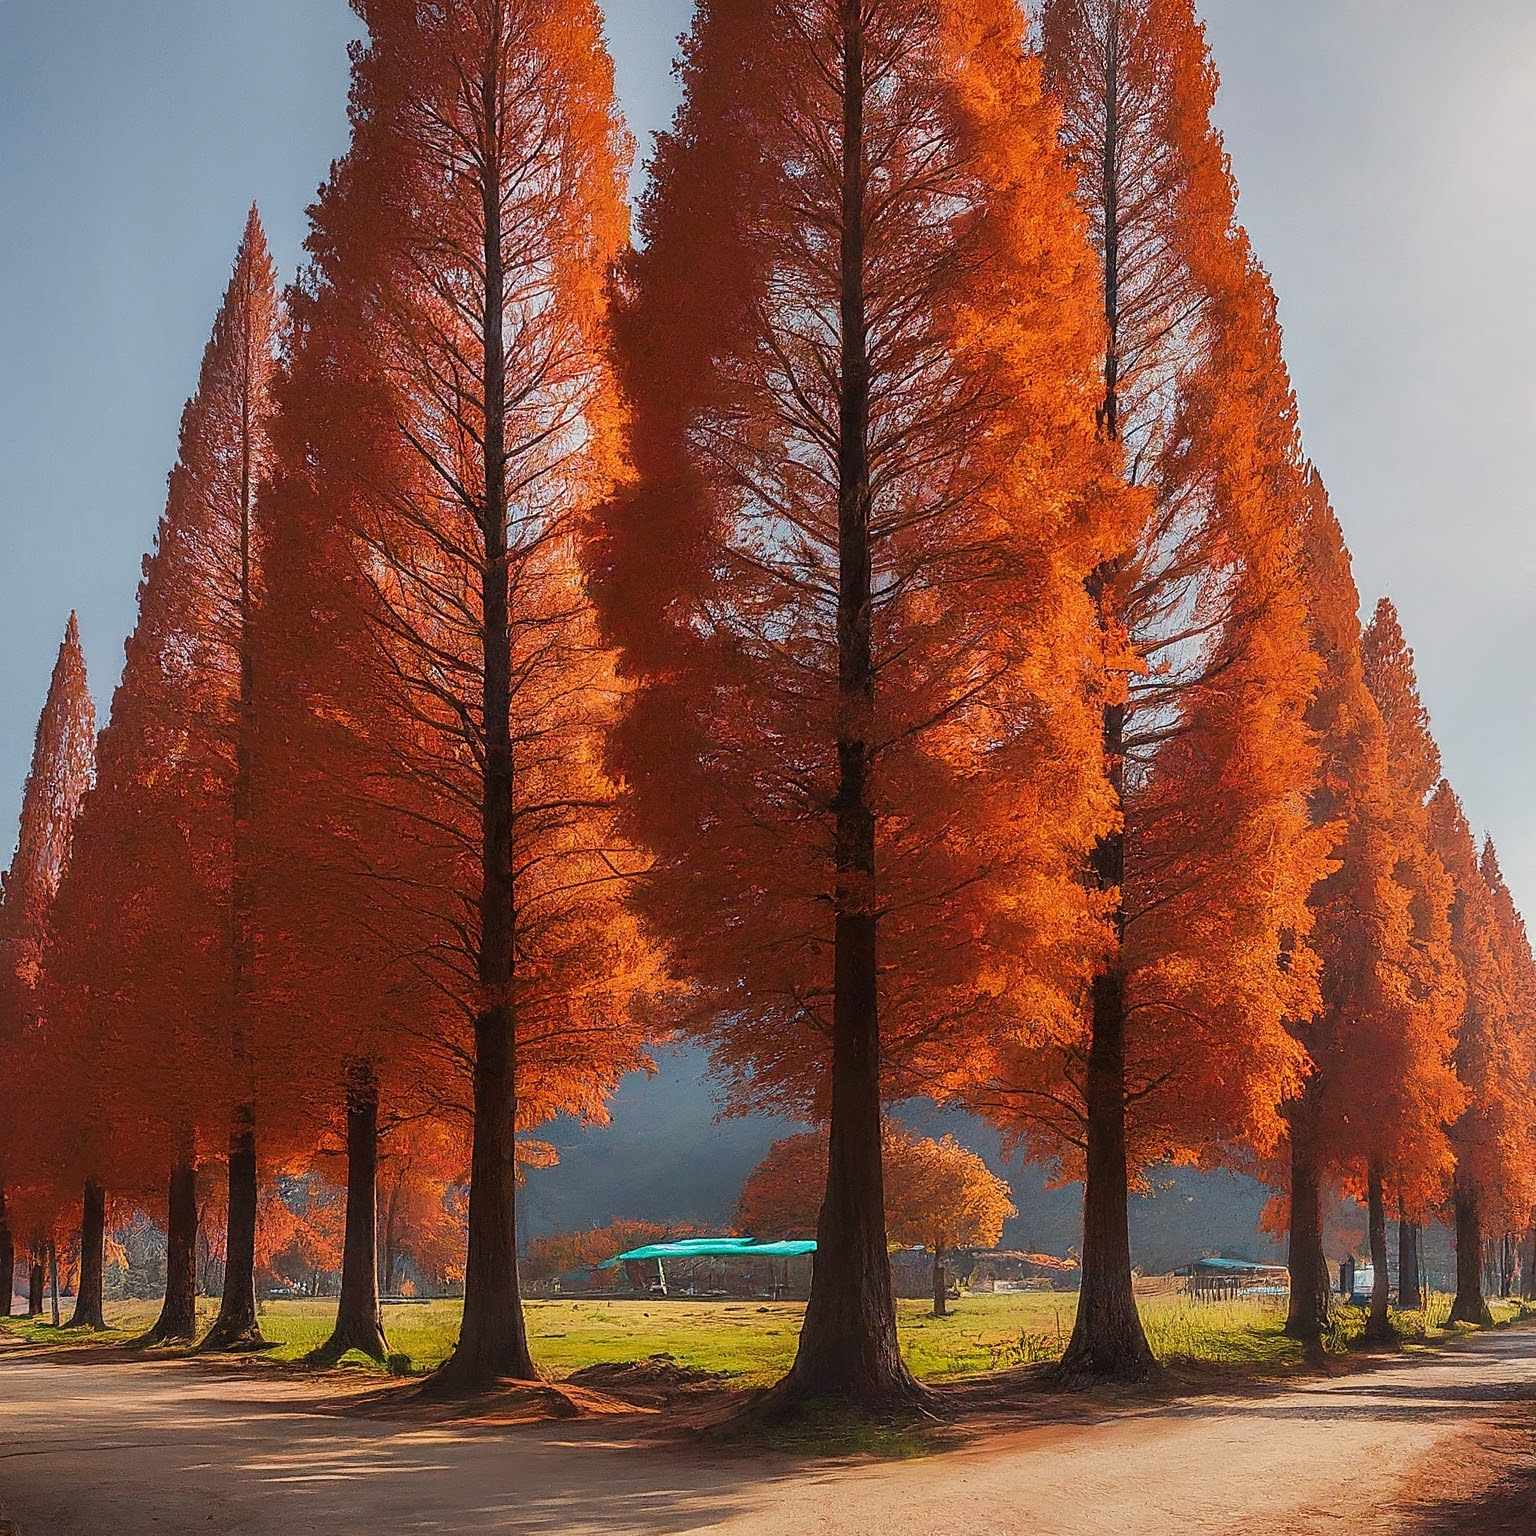 Namiseom Island, South Korea in autumn with red and orange leaves on Metasequoia lane.